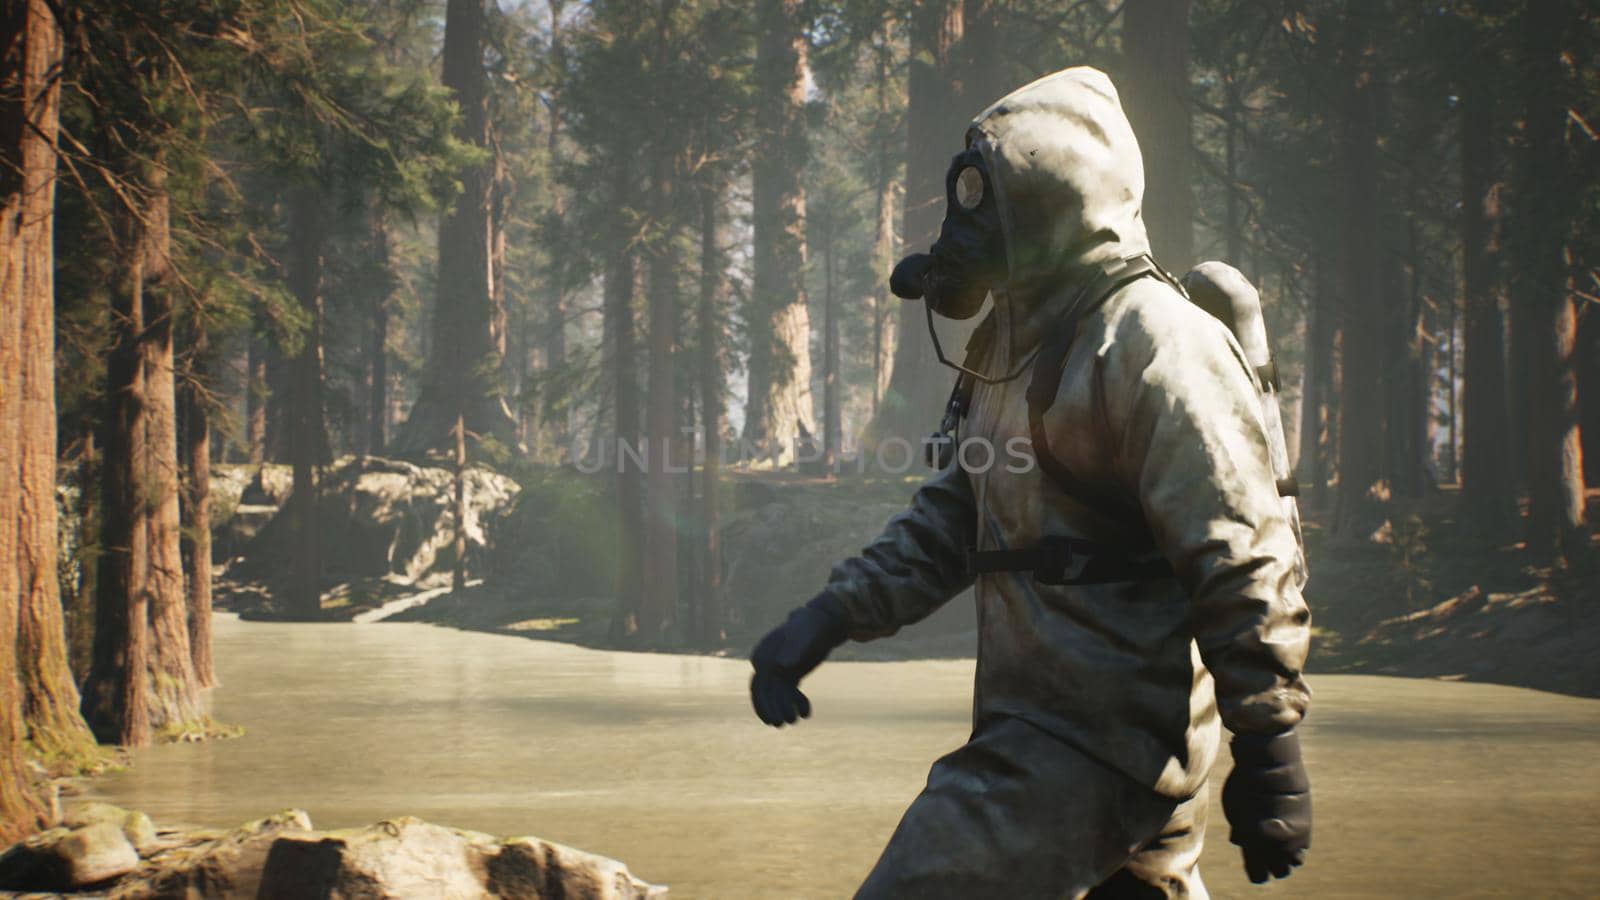 A Stalker in military protective clothing and a gas mask walks through a summer sunny forest. The concept of a post-apocalyptic world after a nuclear war.